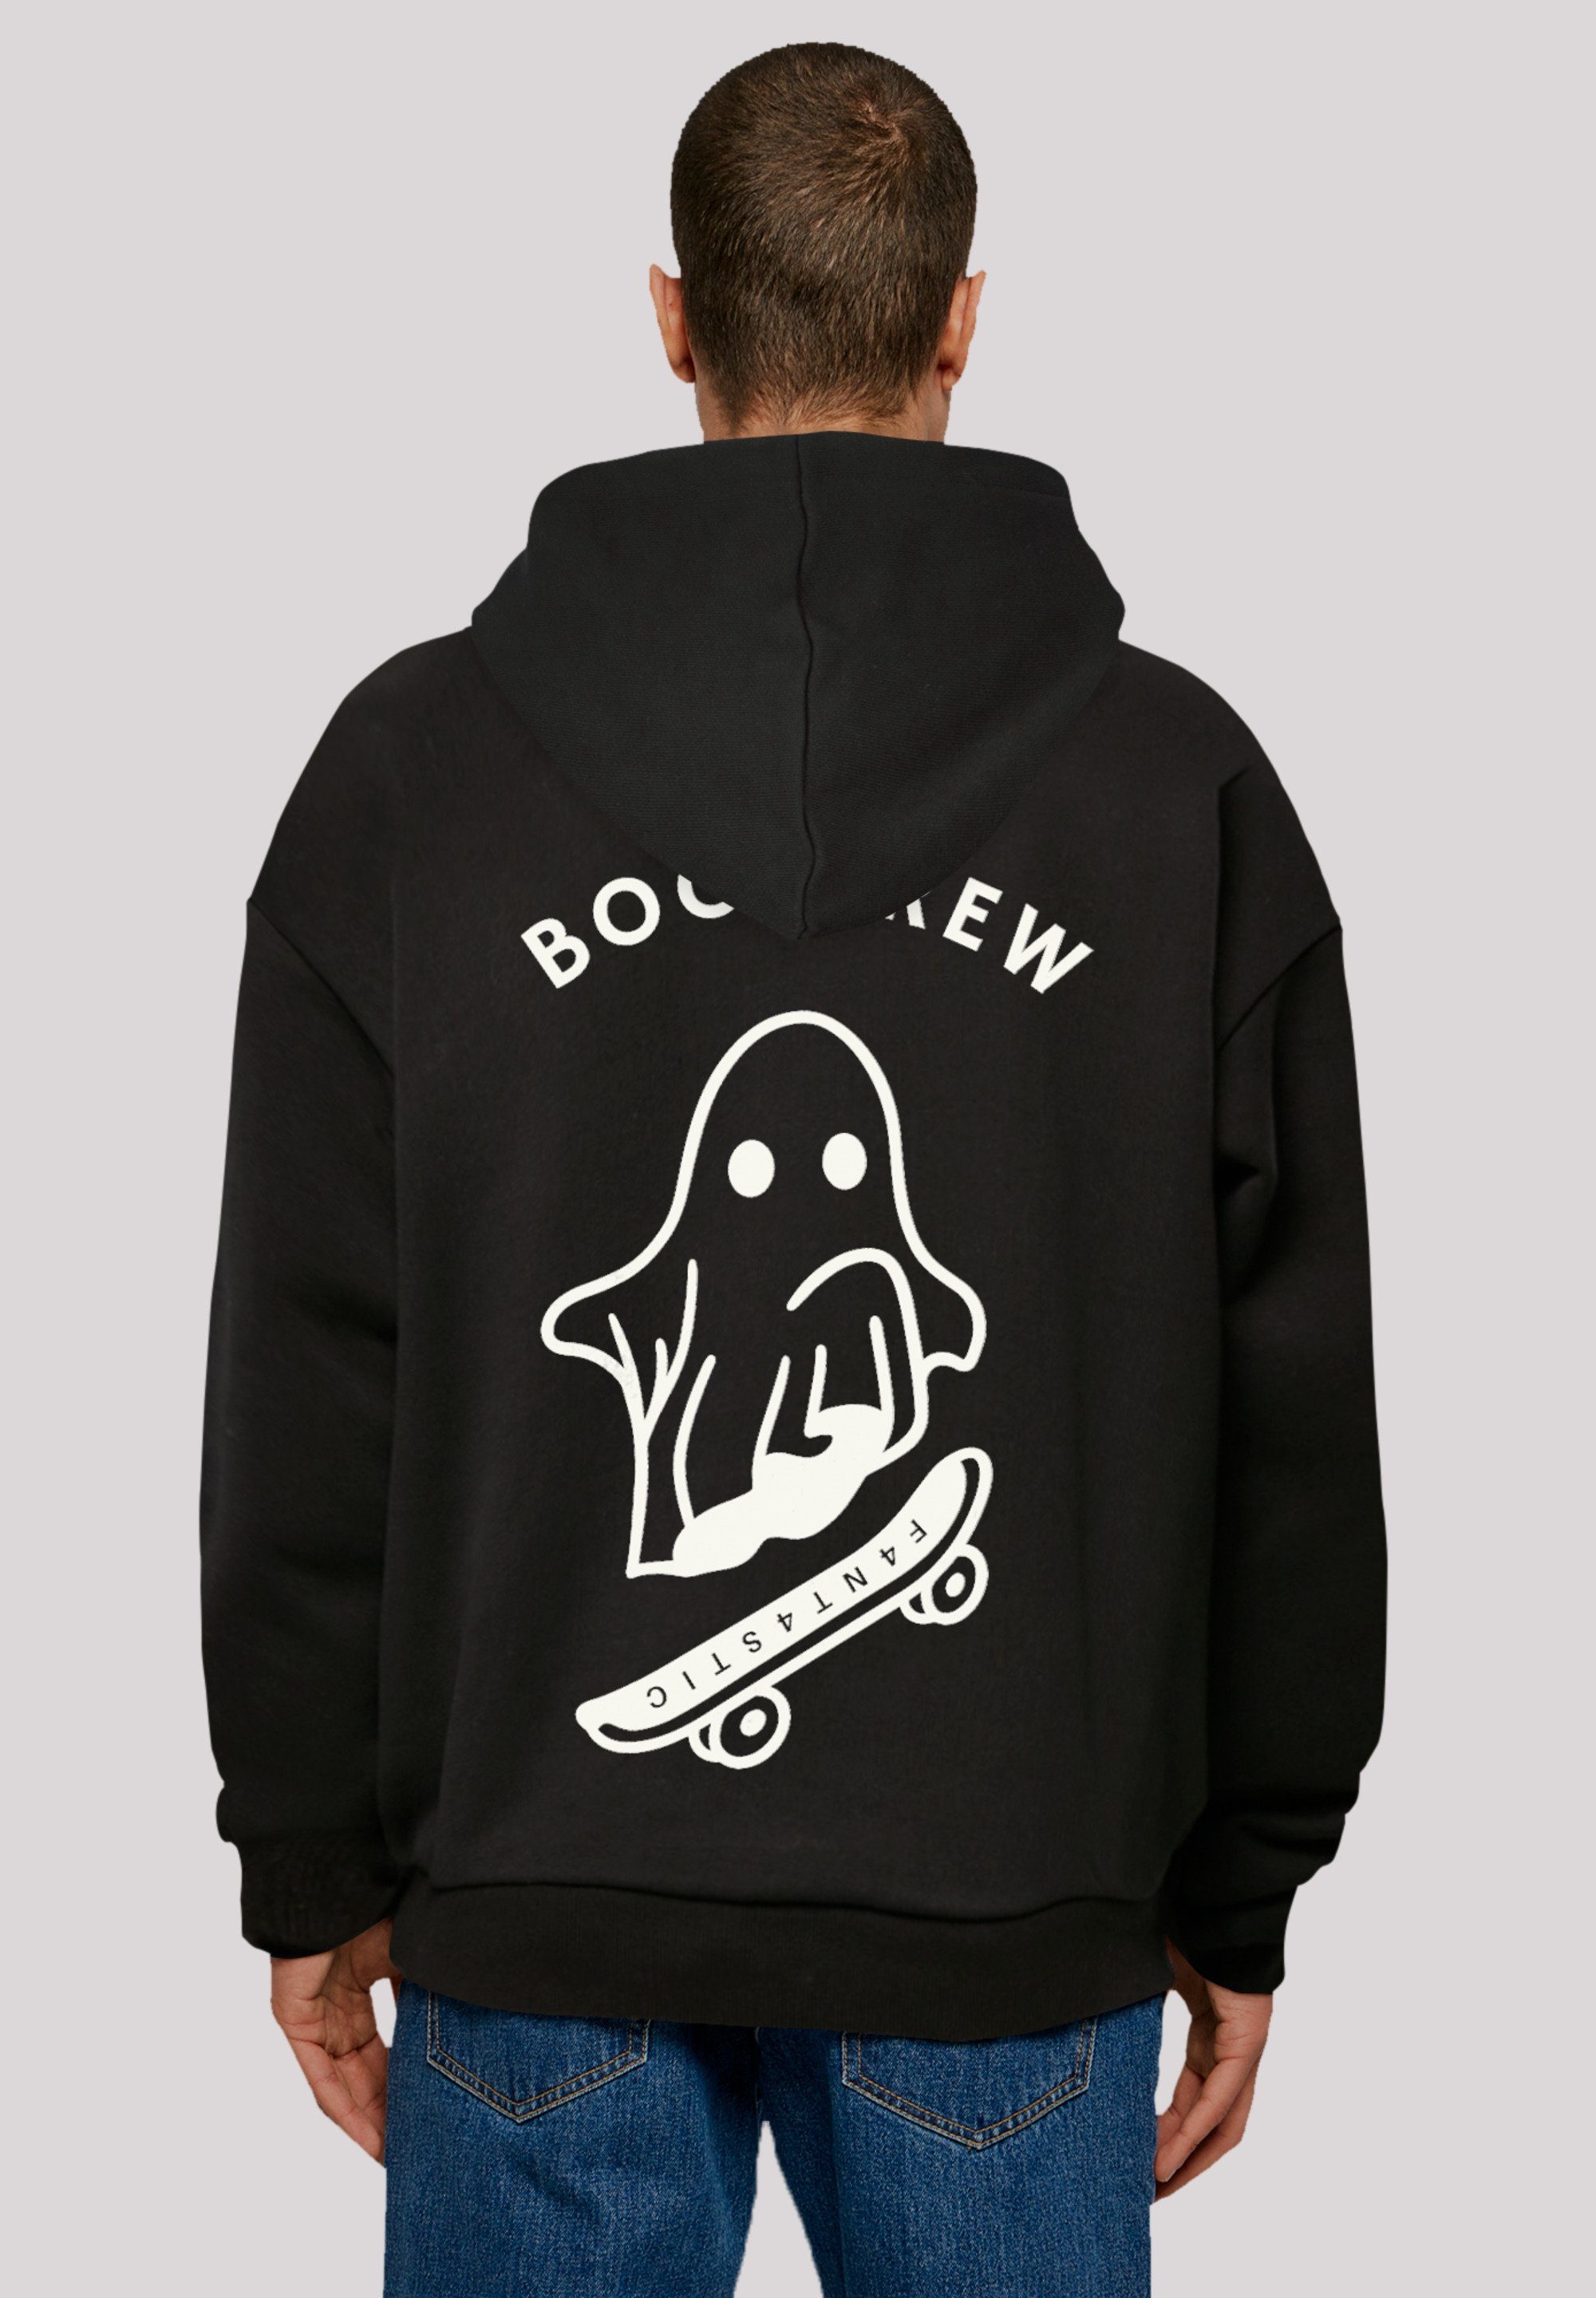 für Outfit Halloween-Vibes F4NT4STIC dein Crew Spooky Boo Print, Hoodie Halloween